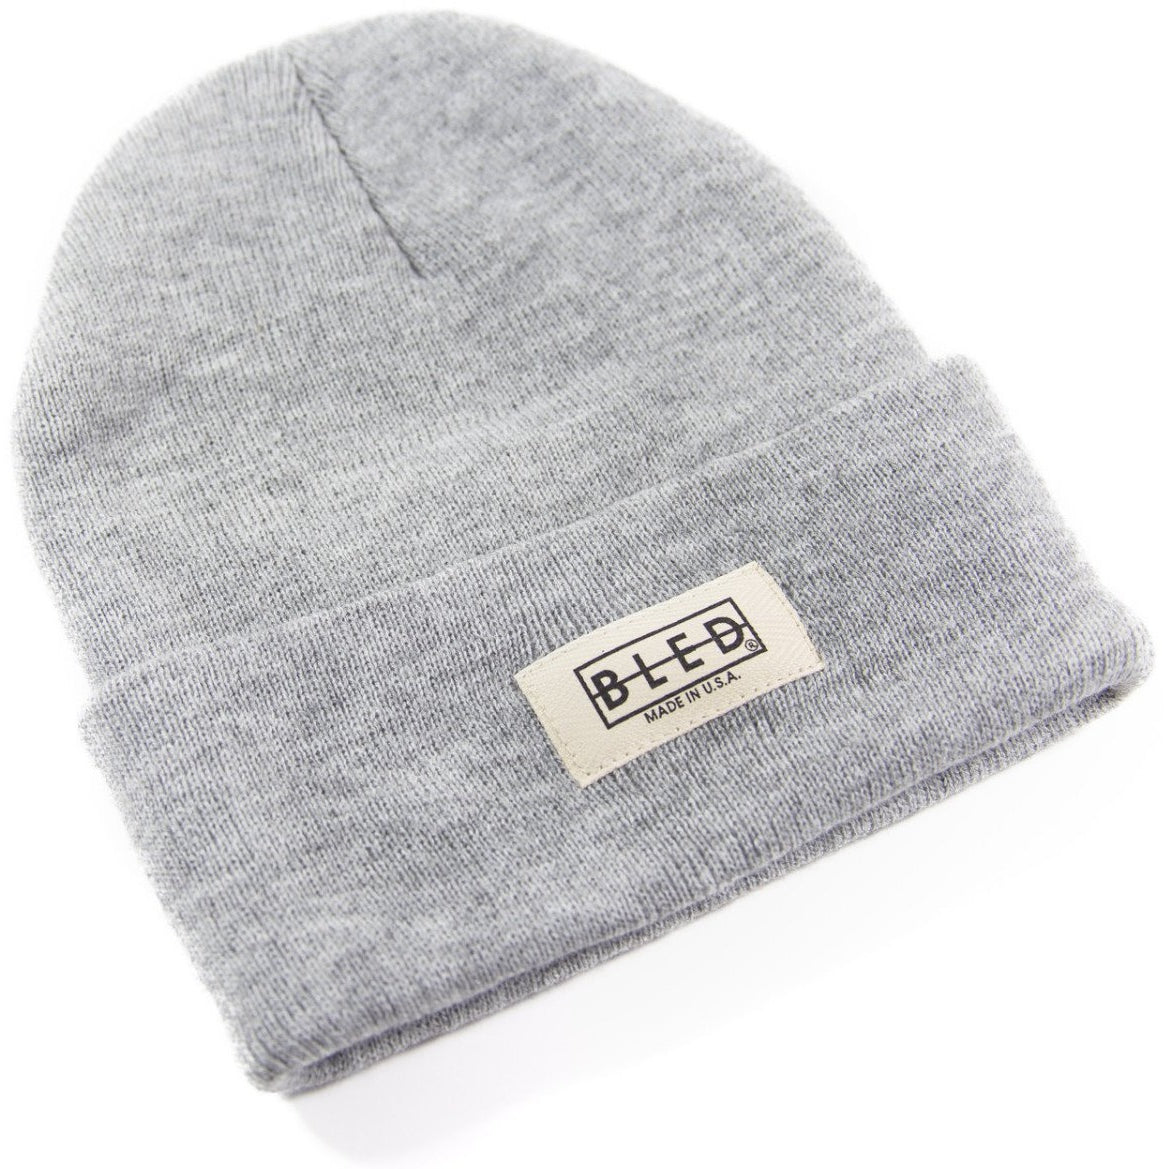 100% acrylic beanie in heather grey featuring twill Bled label on the front, skateboards, skate, hype, streetwear, skateboarding